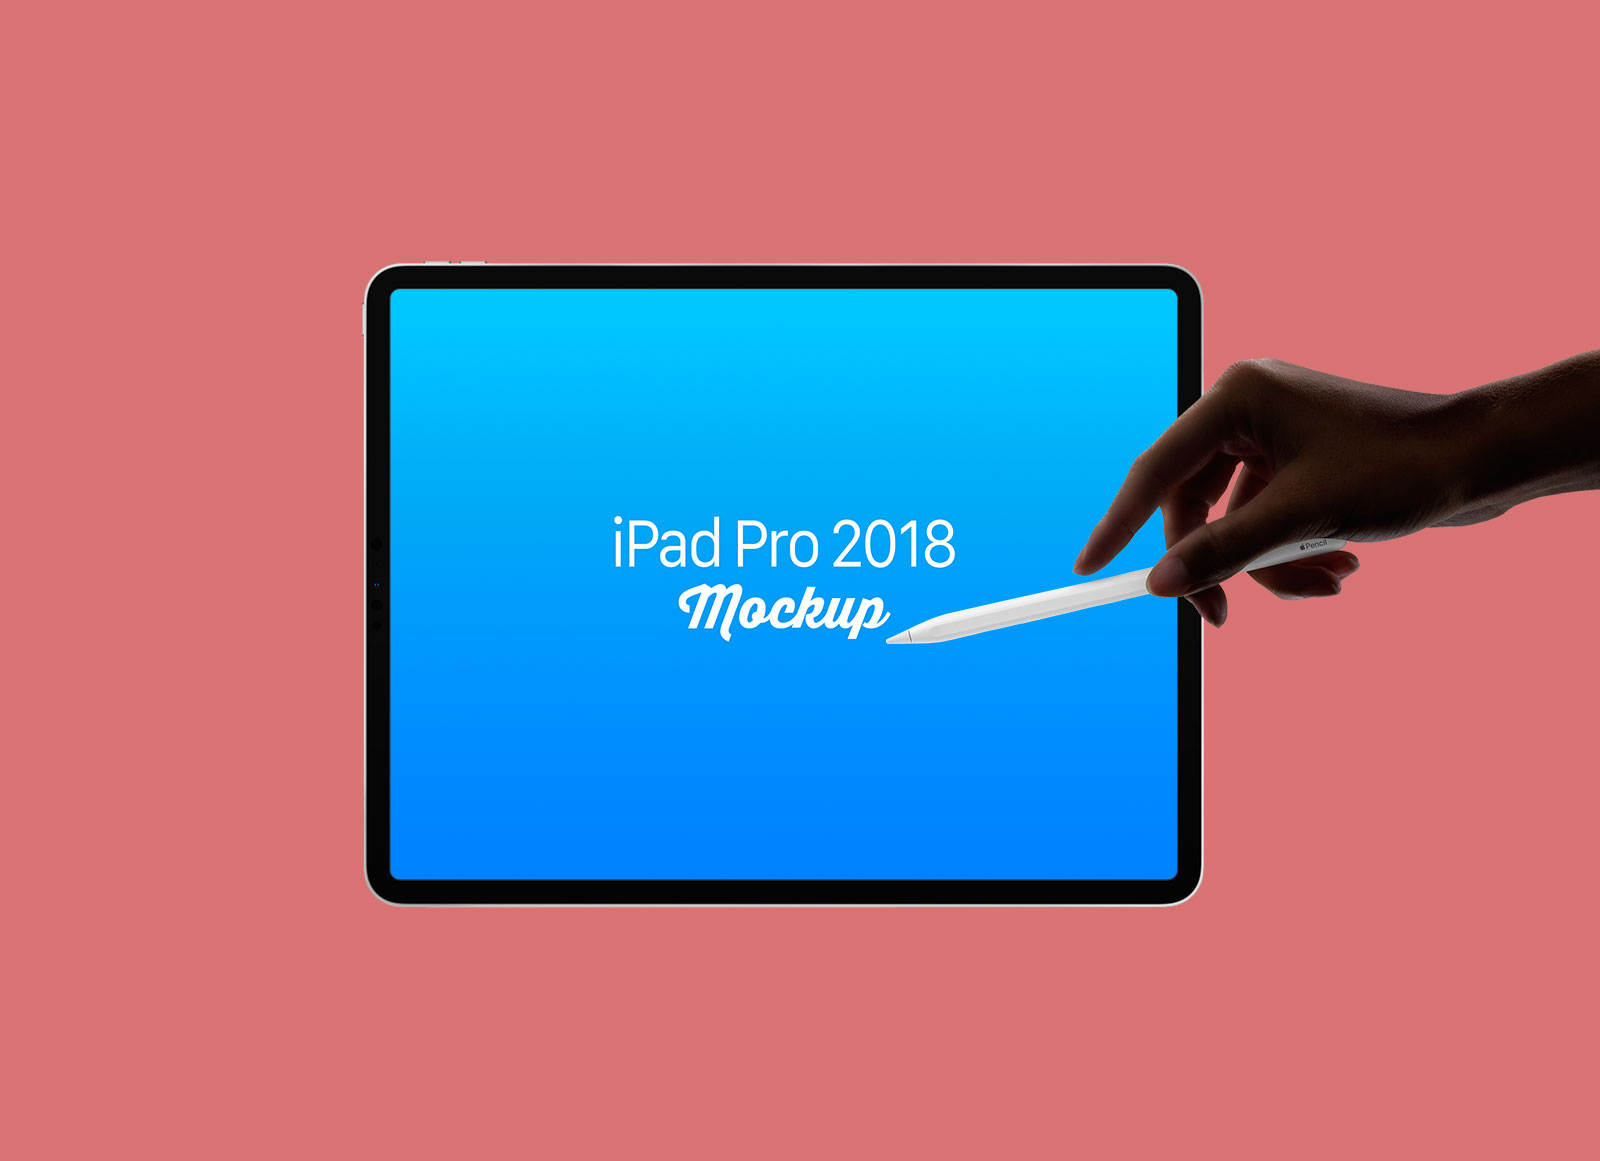 iPad Pro 2018 Mockup With Apple Pencil in Hand PSD Set